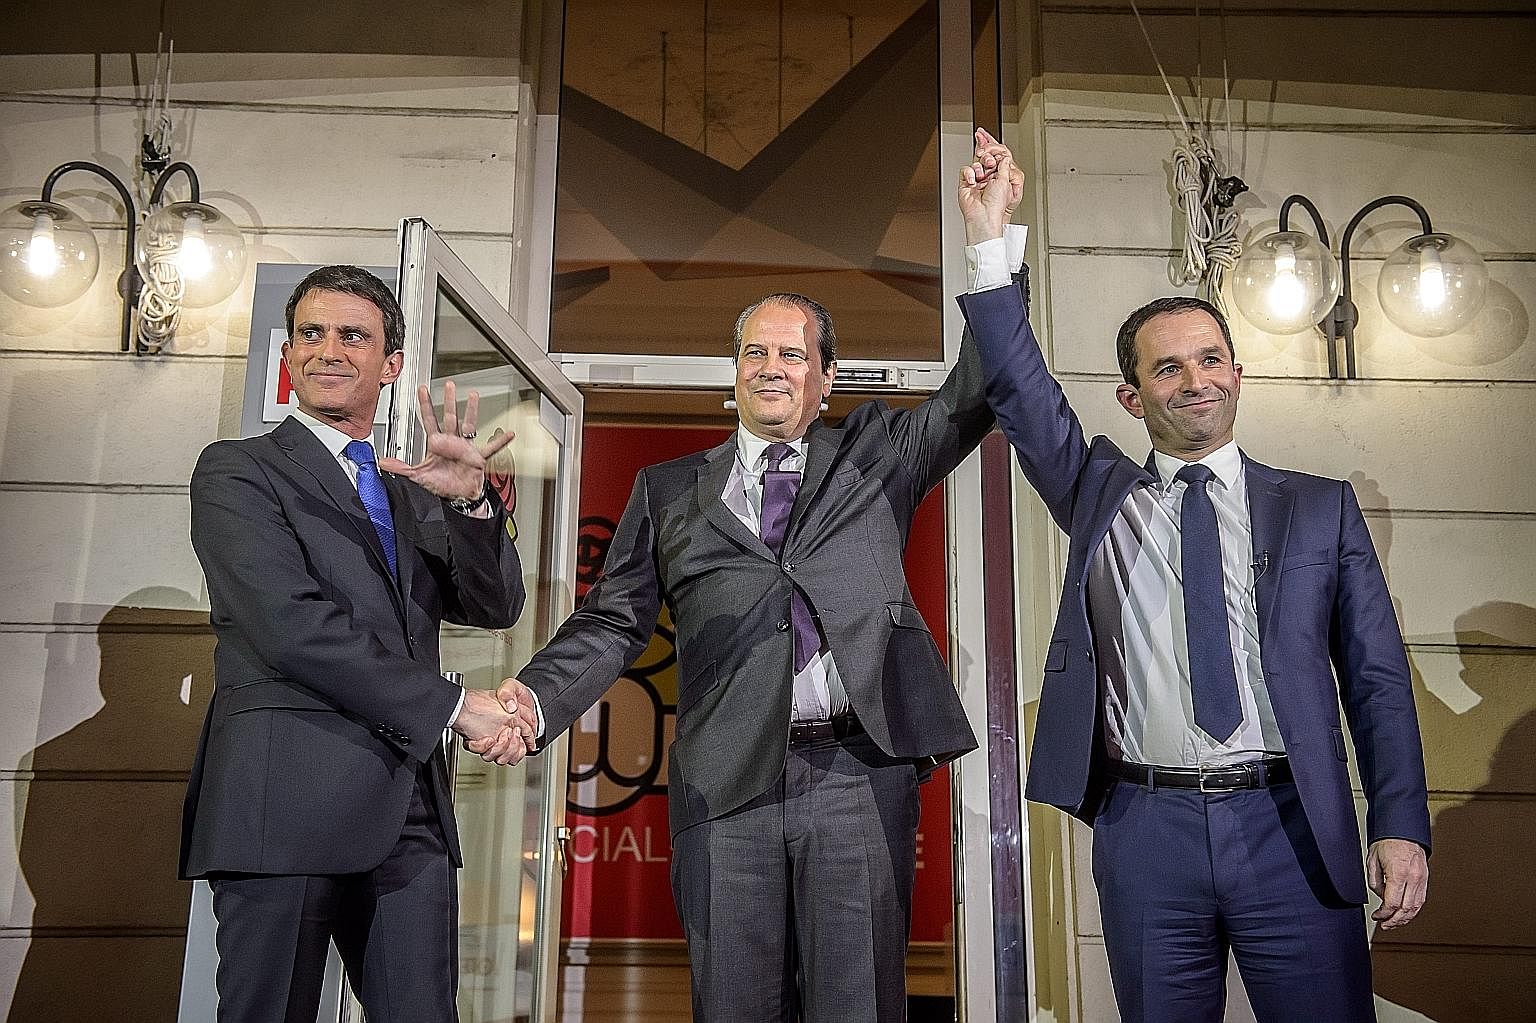 French Socialist party secretary Jean-Christophe Cambadelis (centre) flanked by Mr Benoit Hamon (far right), the winner of the second round of the party's primaries for the 2017 presidential election, and his opponent Manuel Valls on Sunday.